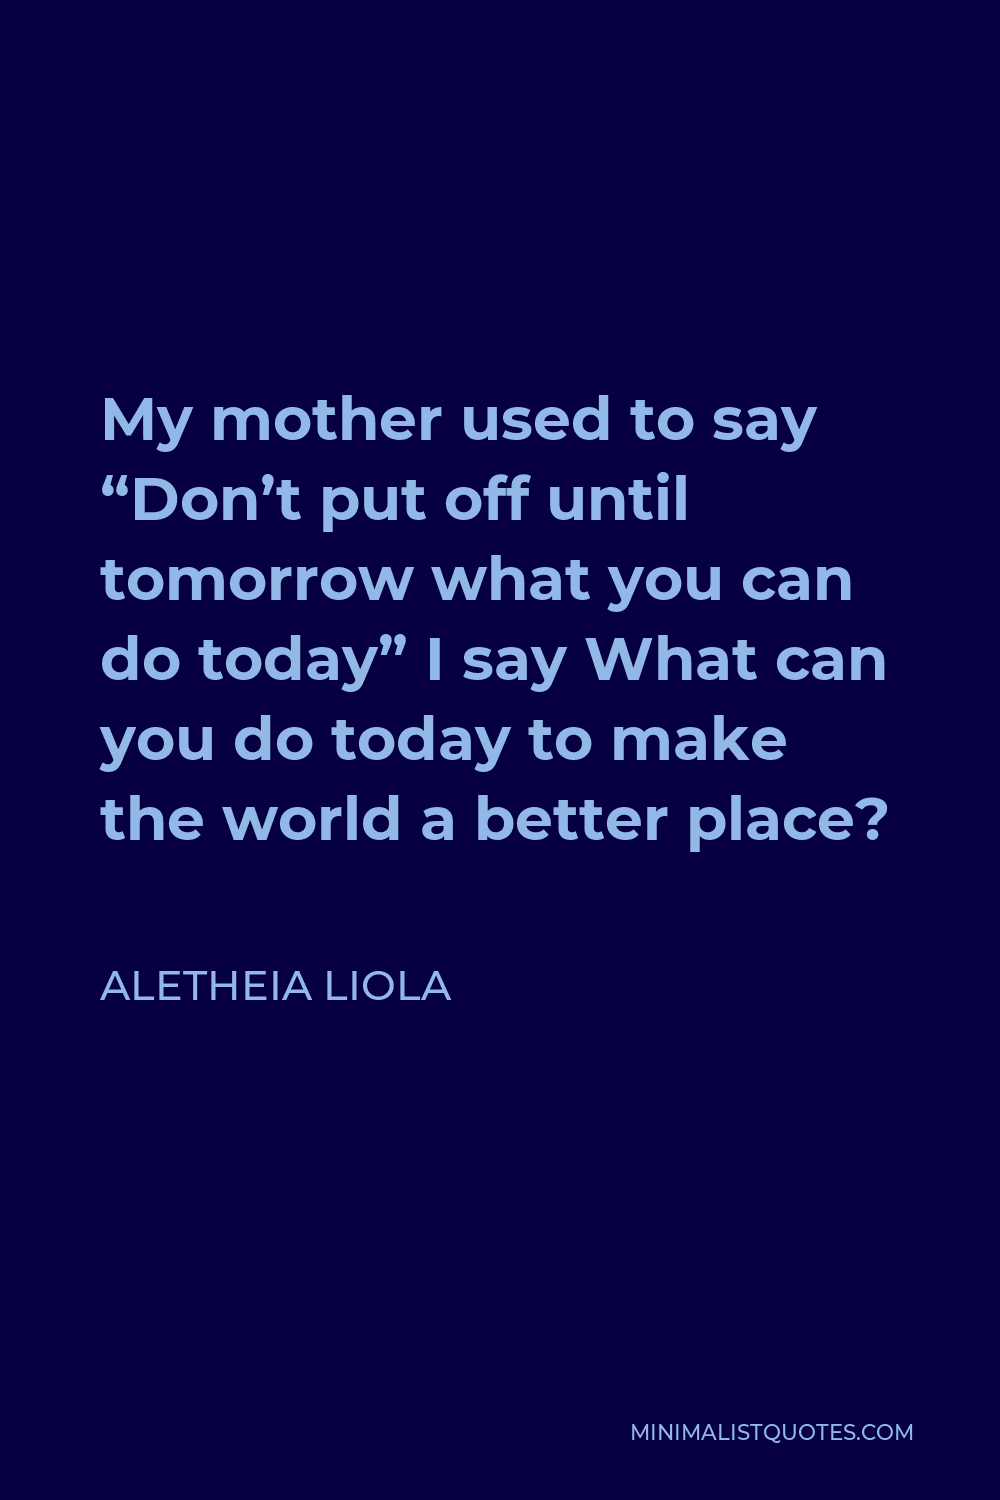 Aletheia Liola Quote - My mother used to say “Don’t put off until tomorrow what you can do today” I say What can you do today to make the world a better place?